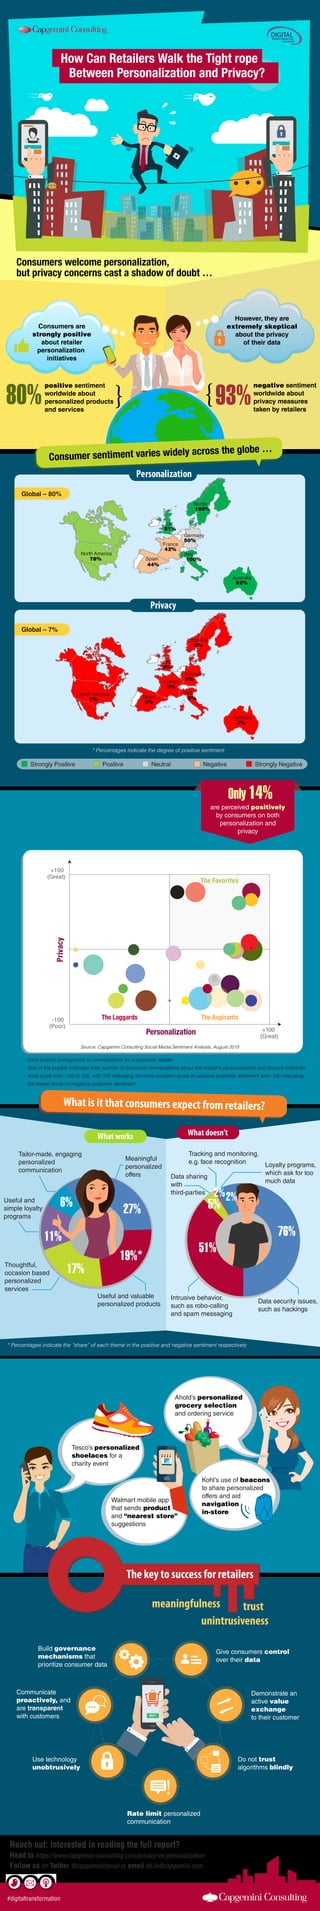 Retailers are struggling to find the
right balance between personalization
and privacy …
Personalized offers that consumers
talk about and like
Source: Capgemini Consulting Social Media Sentiment Analysis, August 2015
* Percentages indicate the “share” of each theme in the positive and negative sentiment respectively
meaningfulness trust
unintrusiveness
Meaningful
personalized
offers
Useful and valuable
personalized products
Thoughtful,
occasion based
personalized
services
Useful and
simple loyalty
programs
Tailor-made, engaging
personalized
communication
11%
6%
27%
19%*
17%
What works What doesn’t
76%
51%
5%
2%2%
Data security issues,
such as hackings
Intrusive behavior,
such as robo-calling
and spam messaging
Data sharing
with
third-parties
Tracking and monitoring,
e.g. face recognition Loyalty programs,
which ask for too
much data
Tesco’s personalized
shoelaces for a
charity event
Ahold’s personalized
grocery selection
and ordering service
Walmart mobile app
that sends product
and “nearest store”
suggestions
Kohl’s use of beacons
to share personalized
offers and aid
navigation
in-store
Consumers welcome personalization,
but privacy concerns cast a shadow of doubt …
However, they are
extremely skeptical
about the privacy
of their data
negative sentiment
worldwide about
privacy measures
taken by retailers
positive sentiment
worldwide about
personalized products
and services
80% 93%
Only 14%
are perceived positively
by consumers on both
personalization and
privacy
#digitaltransformation
Reach out: Interested in reading the full report?
Head to https://www.capgemini-consulting.com/privacy-vs-personalization
Follow us on Twitter @capgeminiconsul or email dti.in@capgemini.com
The key to success for retailers
What is it that consumers expect from retailers?
}
Strongly Positive Positive Neutral Negative Strongly Negative
Build governance
mechanisms that
prioritize consumer data
Communicate
proactively, and
are transparent
with customers
Rate limit personalized
communication
Demonstrate an
active value
exchange
to their customer
Do not trust
algorithms blindly
Give consumers control
over their data
Use technology
unobtrusively
!
- Each bubble corresponds to conversations for a particular retailer
- Size of the bubble indicates total number of consumer conversations about the retailer’s personalization and privacy initiatives
- Axes scale from -100 to 100, with 100 indicating the most excellent score on positive customer sentiment and -100 indicating
the lowest score on negative customer sentiment
}
Consumers are
strongly positive
about retailer
personalization
initiatives
Personalization
Privacy
Global – 80%
Global – 7%
* Percentages indicate the degree of positive sentiment
France
0%
Spain
8%
Germany
0%
UK
9%
Italy
0%
Nordics
0%
Australia
2%
North America
7%
North America
78%
France
42%
Spain
44%
Germany
50%
UK
81%
Italy
100%
Nordics
100%
Australia
82%
Consumer sentiment varies widely across the globe …
How Can Retailers Walk the Tight rope
Between Personalization and Privacy?
DIGITALTRANSFORMATION
INSTITUTE
+100
(Great)
+100
(Great)
Privacy
Personalization
-100
(Poor)
The AspirantsThe Laggards
The Favorites
 